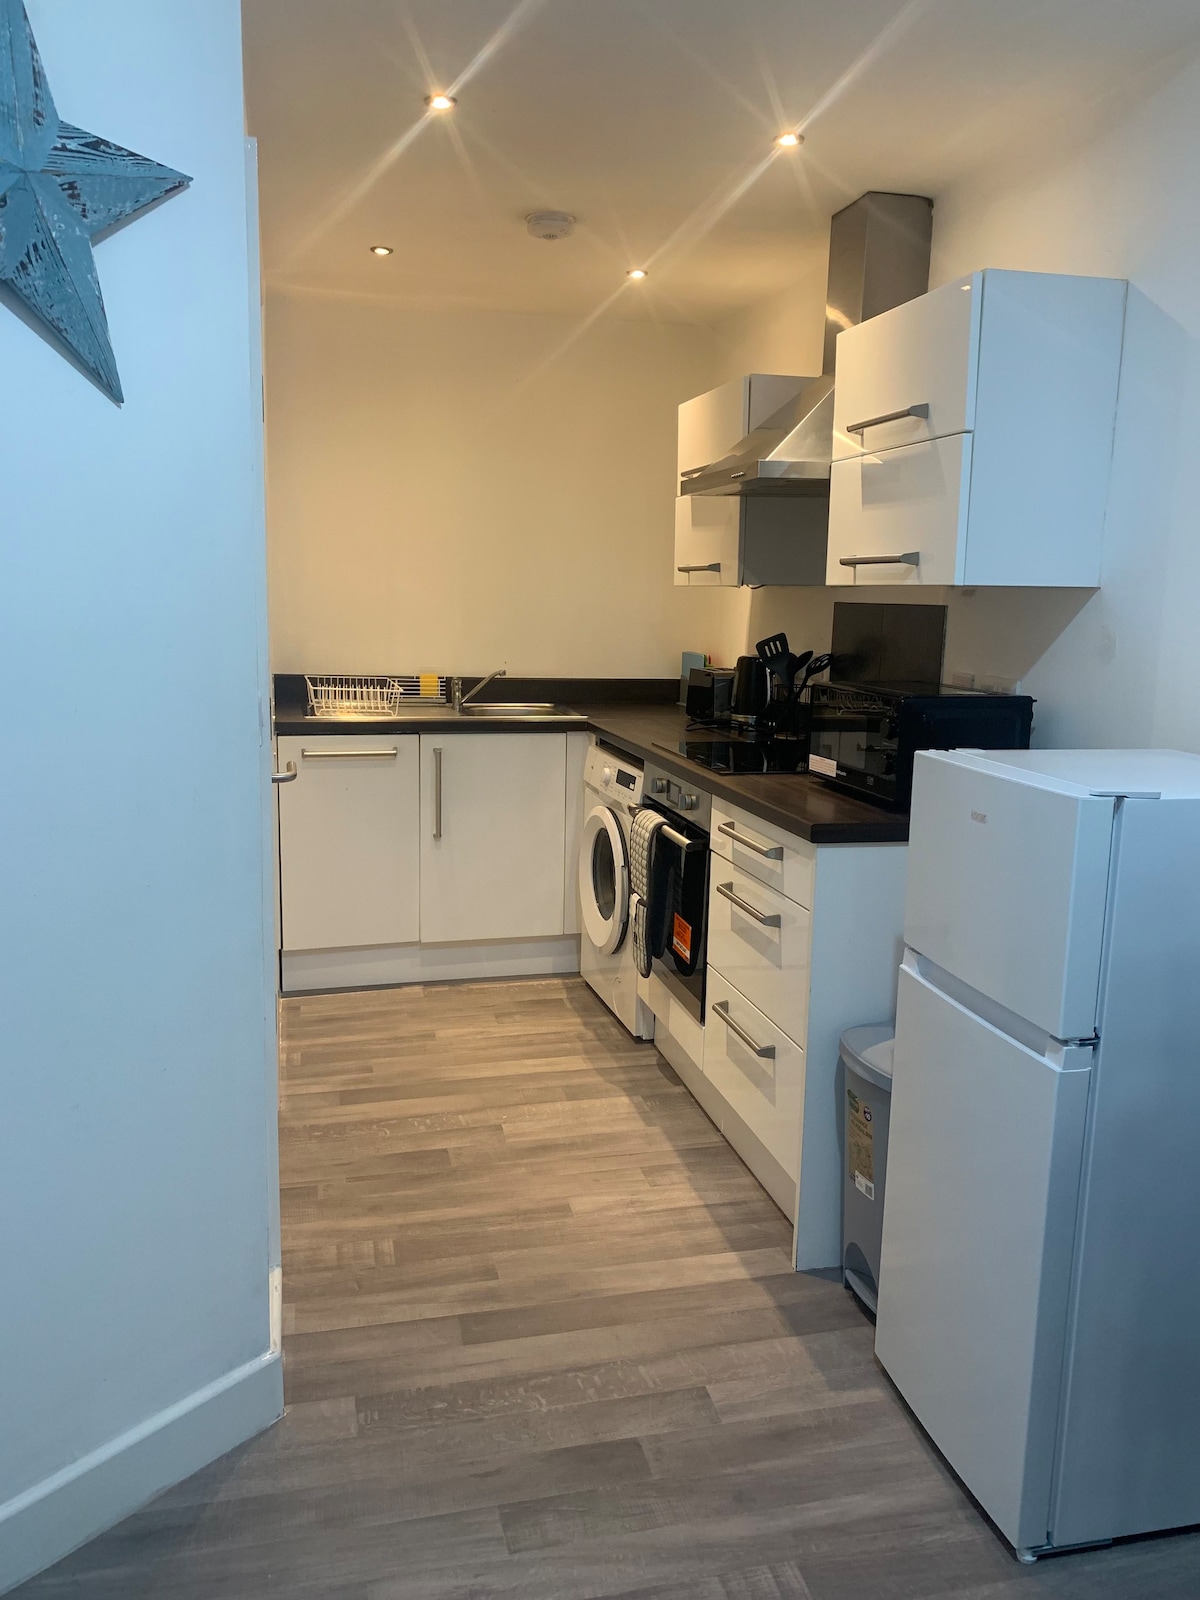 A beautiful flat in Leicester city centre